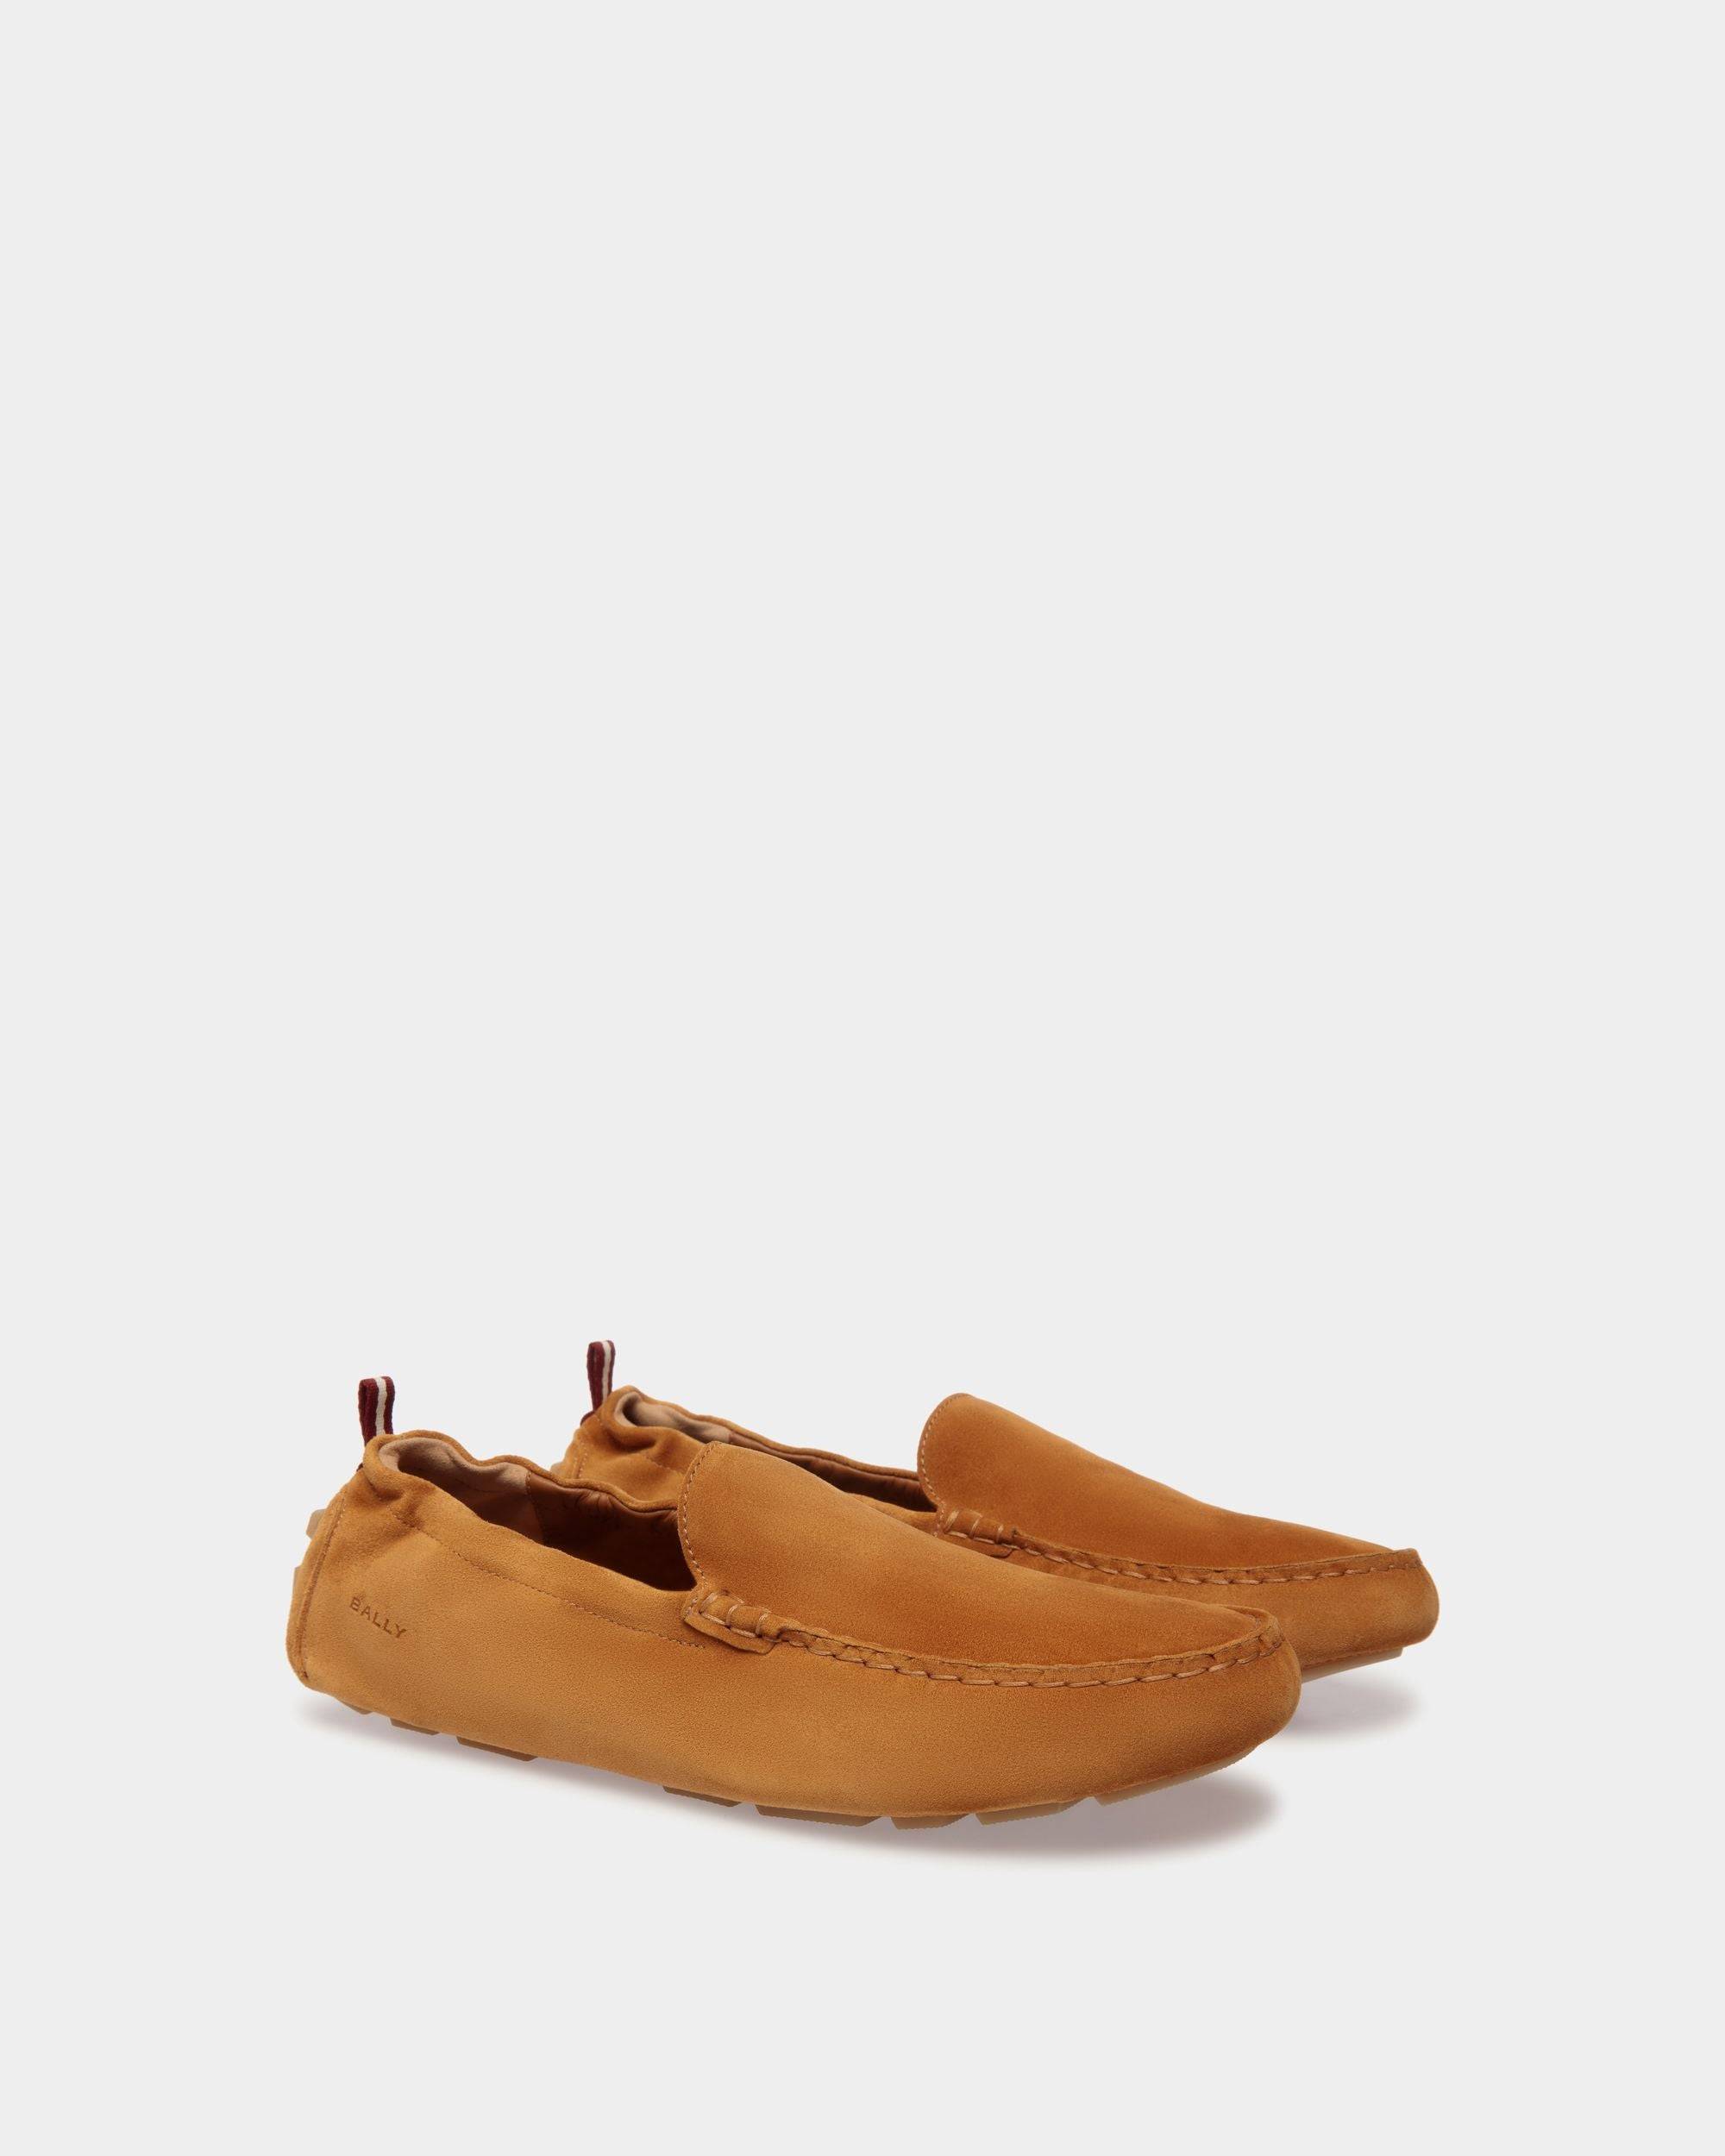 Kerbs Driver in Brown Suede Leather - Men's - Bally - 03